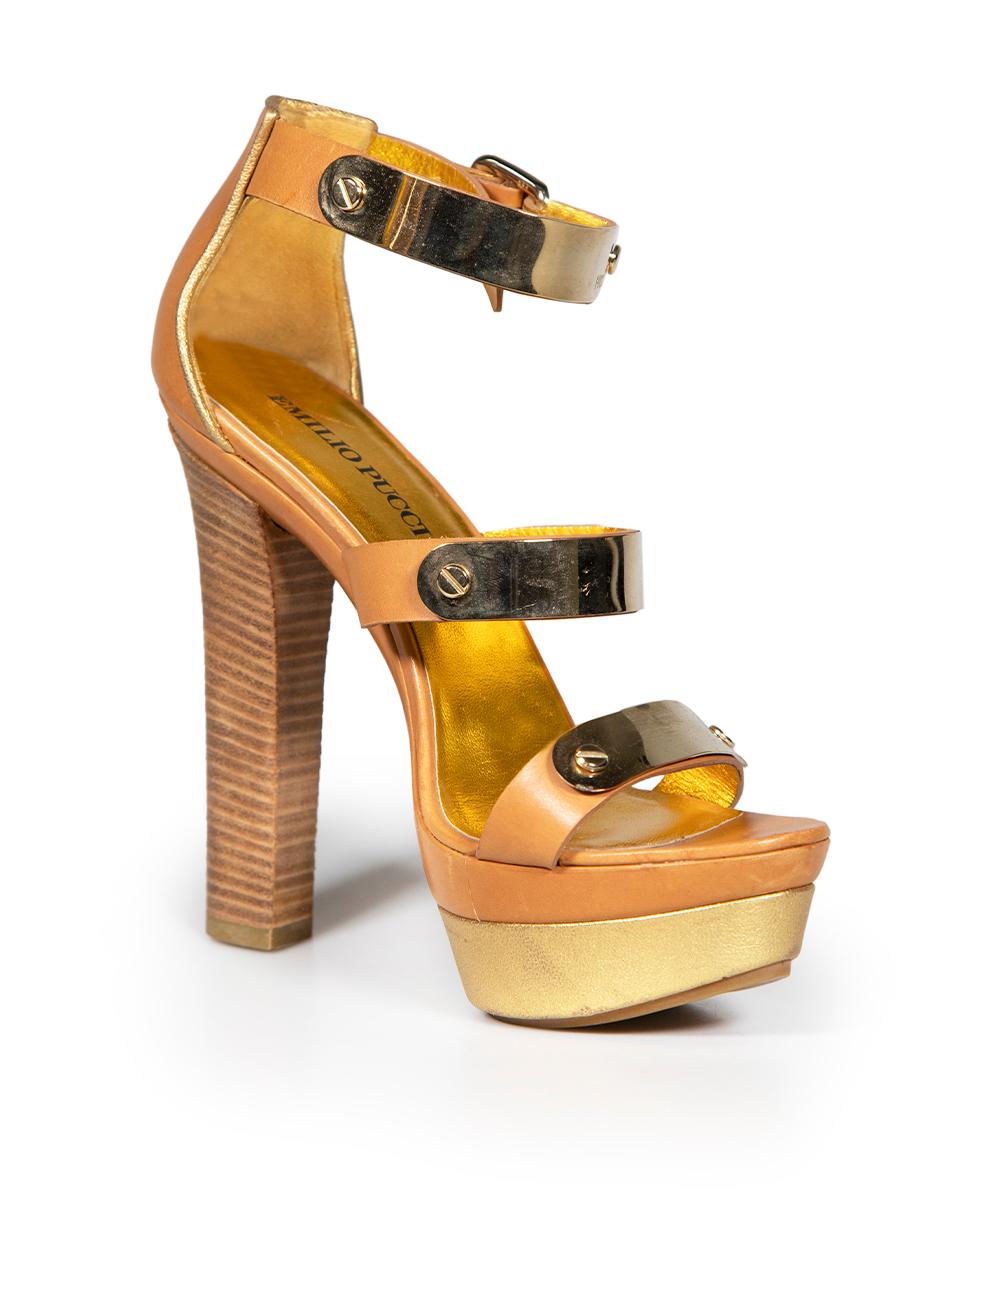 CONDITION is Good. Minor wear to the heels is evident. Light wear to the leather and platform edges and scratches to metal hardware on this used Emilio Pucci designer resale item.
 
 
 
 Details
 
 
 Brown
 
 Leather
 
 Sanndals
 
 High heeled
 
